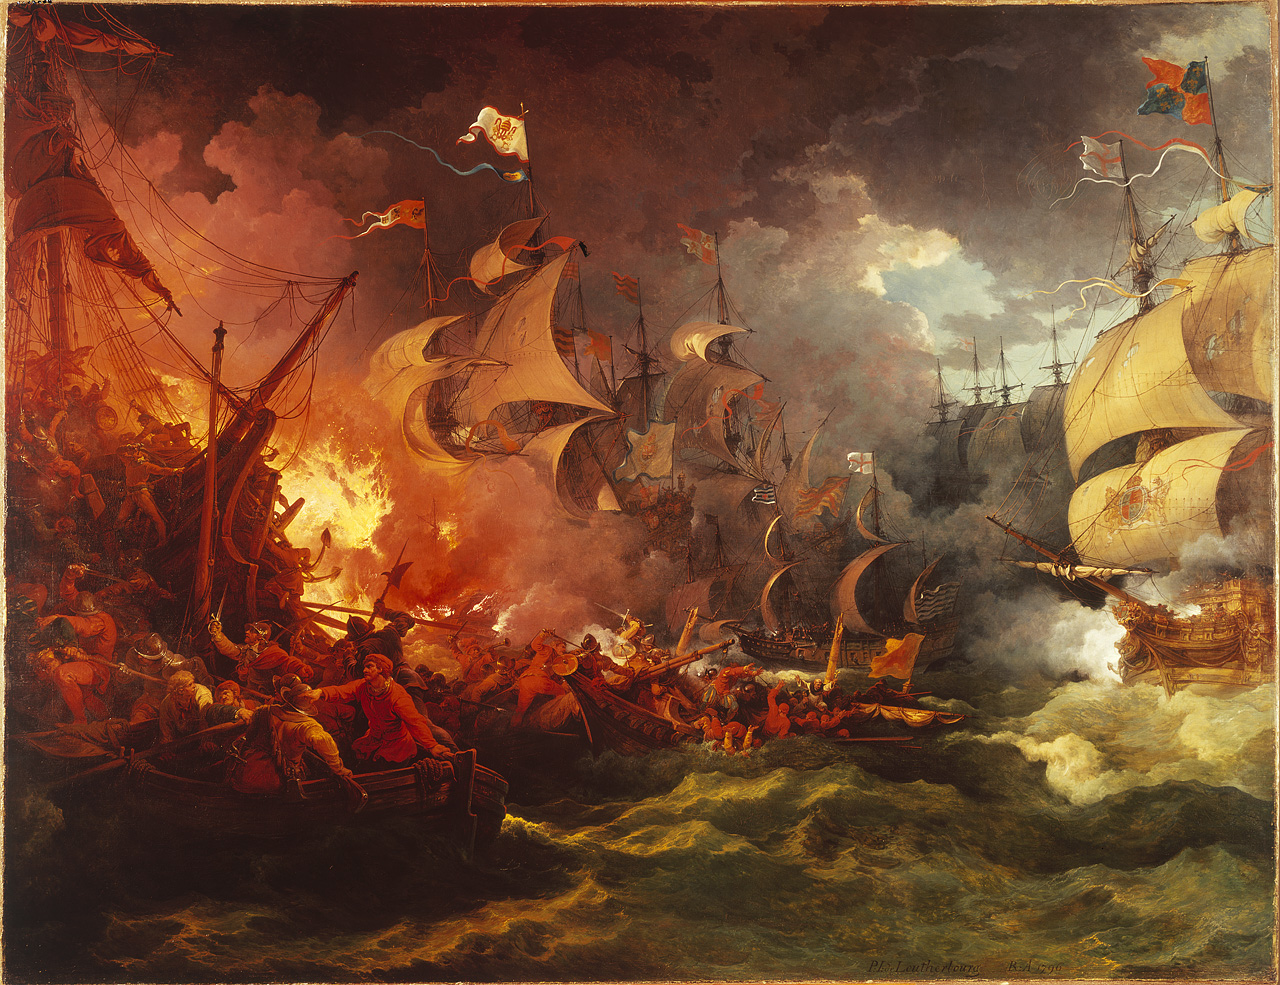 Battle of Gravelines - English defeat the Spanish Armada near Calais, August 8th, 1588, by 	Philippe-Jacques de Loutherbourg (1740-1812), painted in 1796, National Maritime Museum, Greenwich, London, Greenwich Hospital Collection, BHC0264.